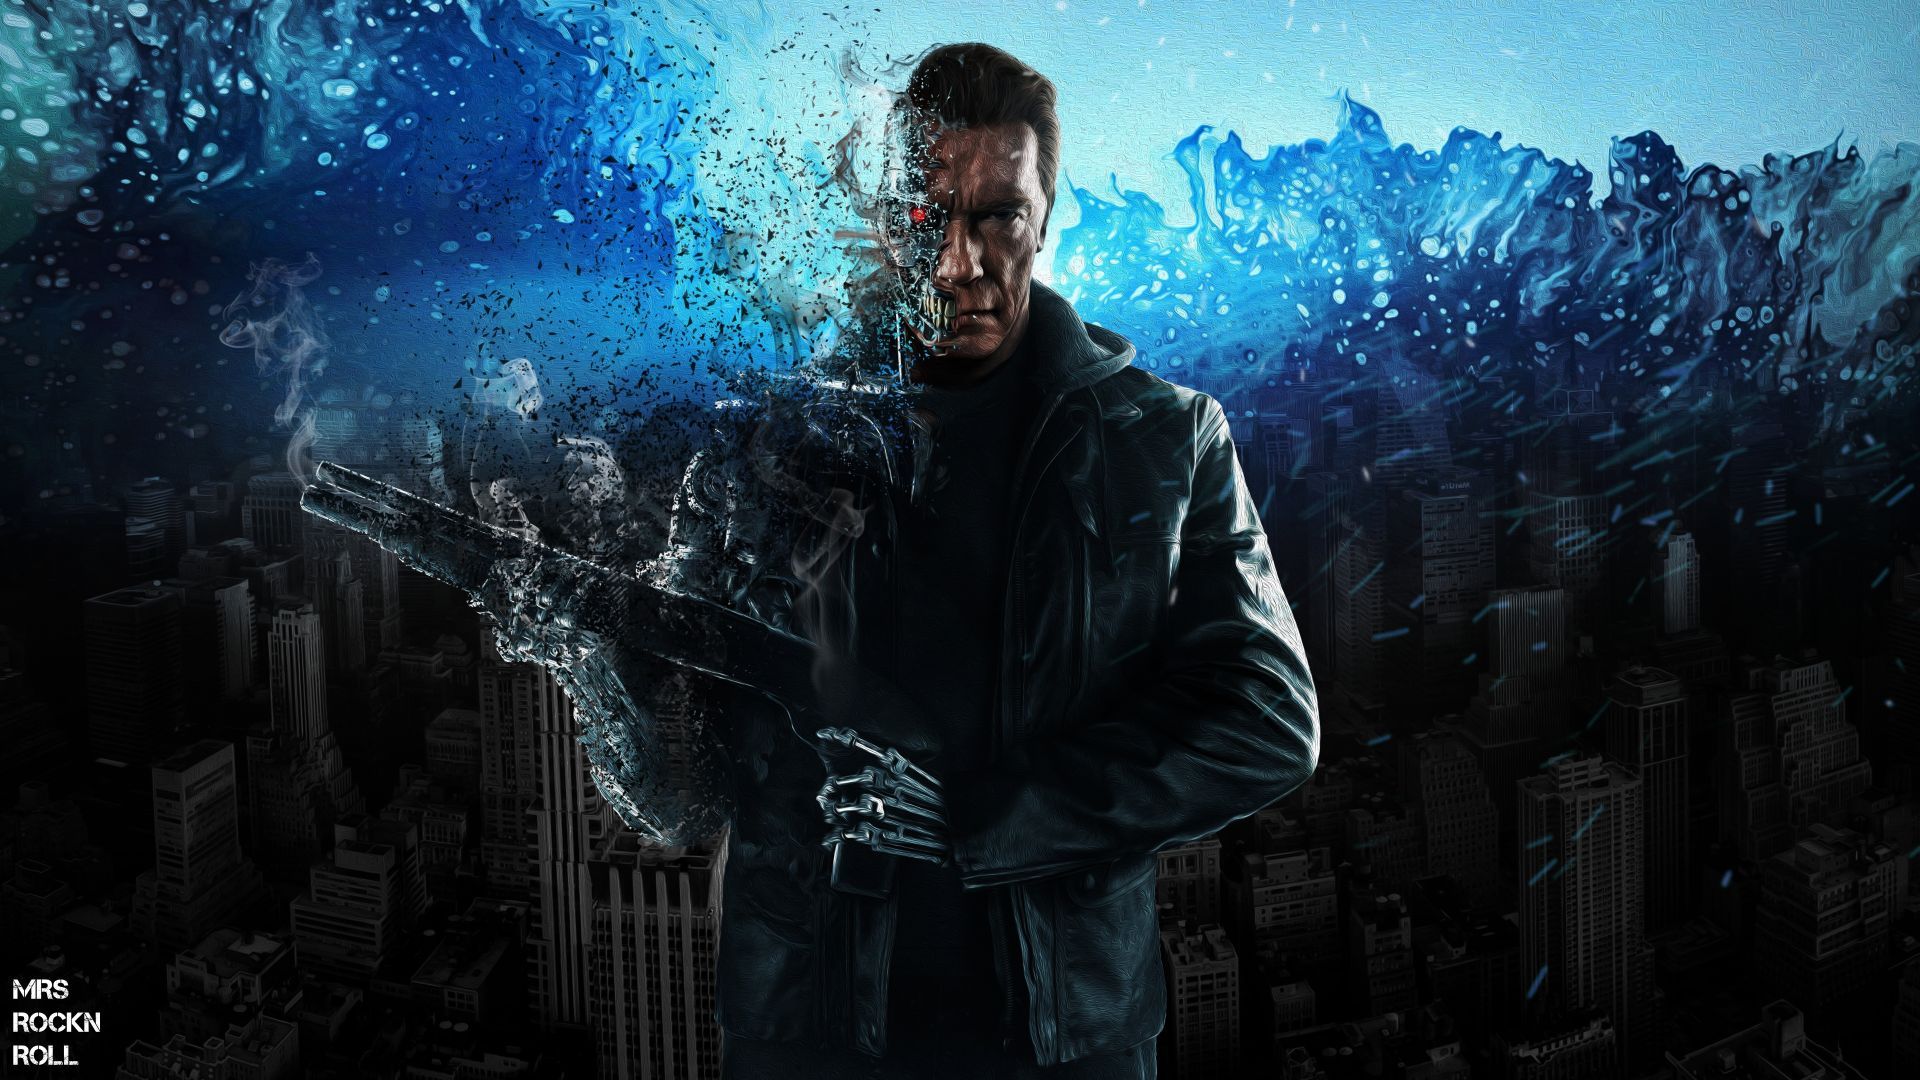 Movie, the terminator, arnold, art wallpaper, HD image, picture, background, 5158ff